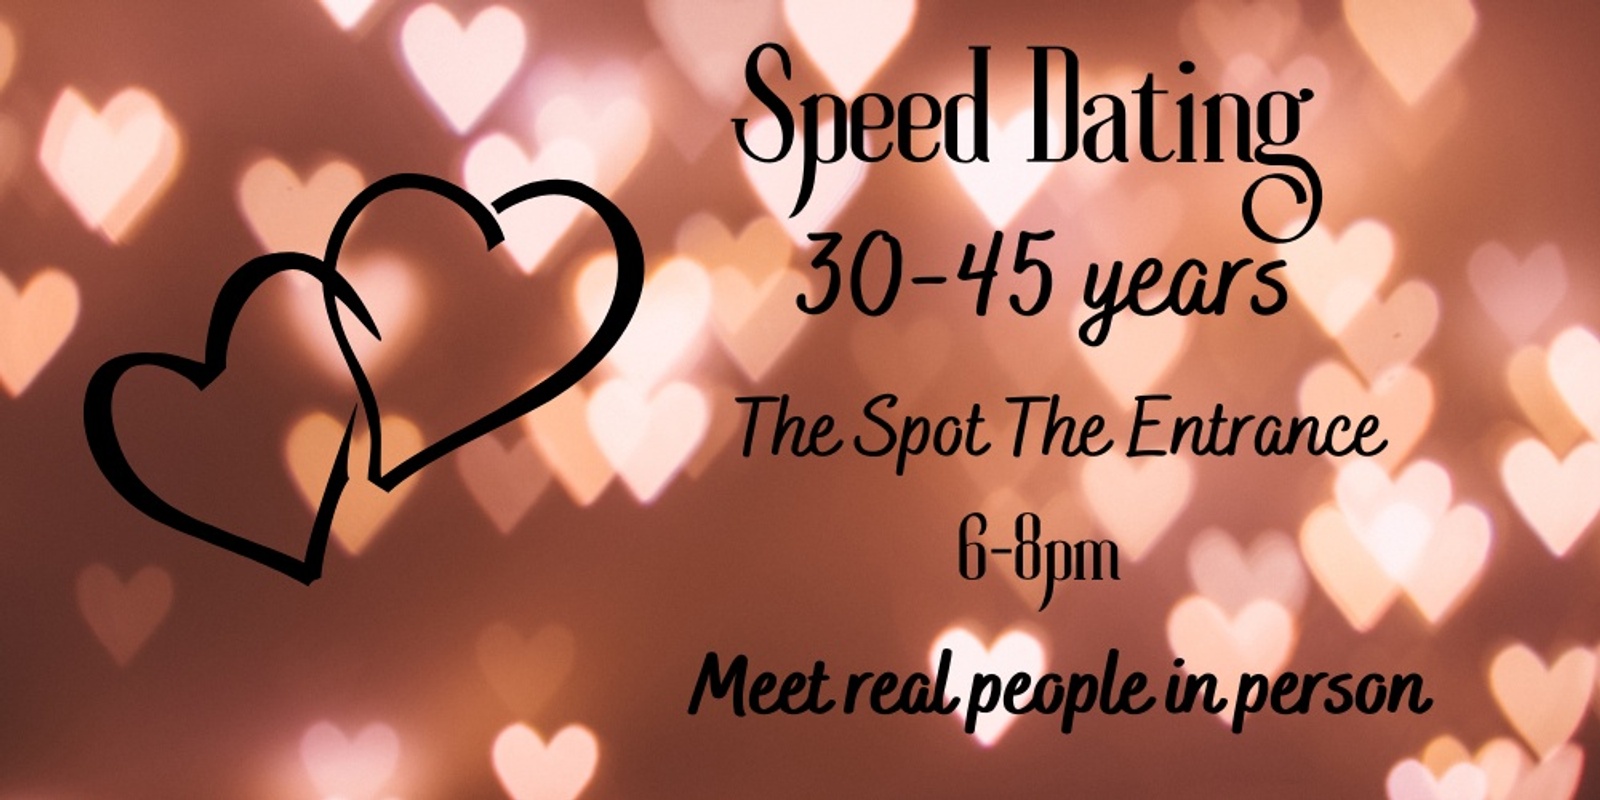 Banner image for Canceled - 30-45 years Speed Dating 